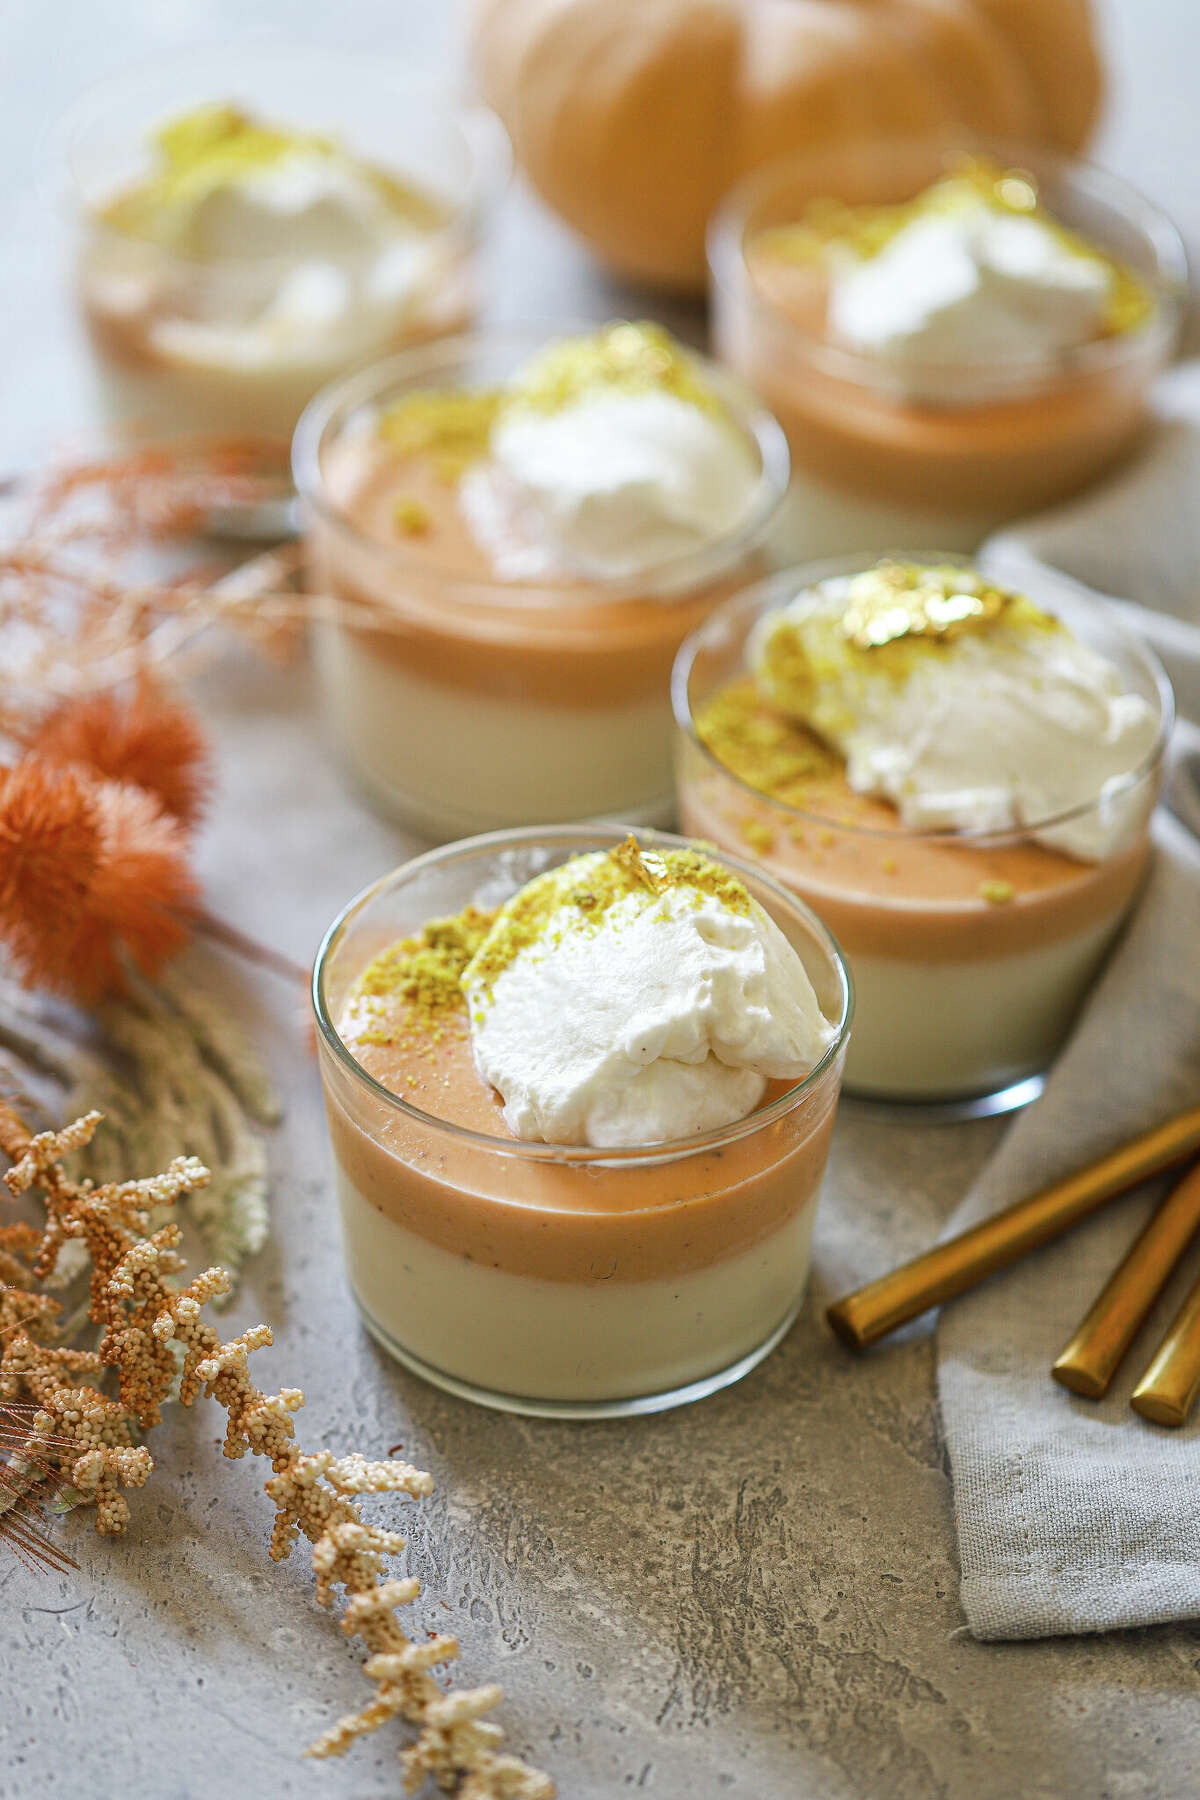 This pumpkin pudding is spiced with chai masala and garnished with whipped cream and pistachios.